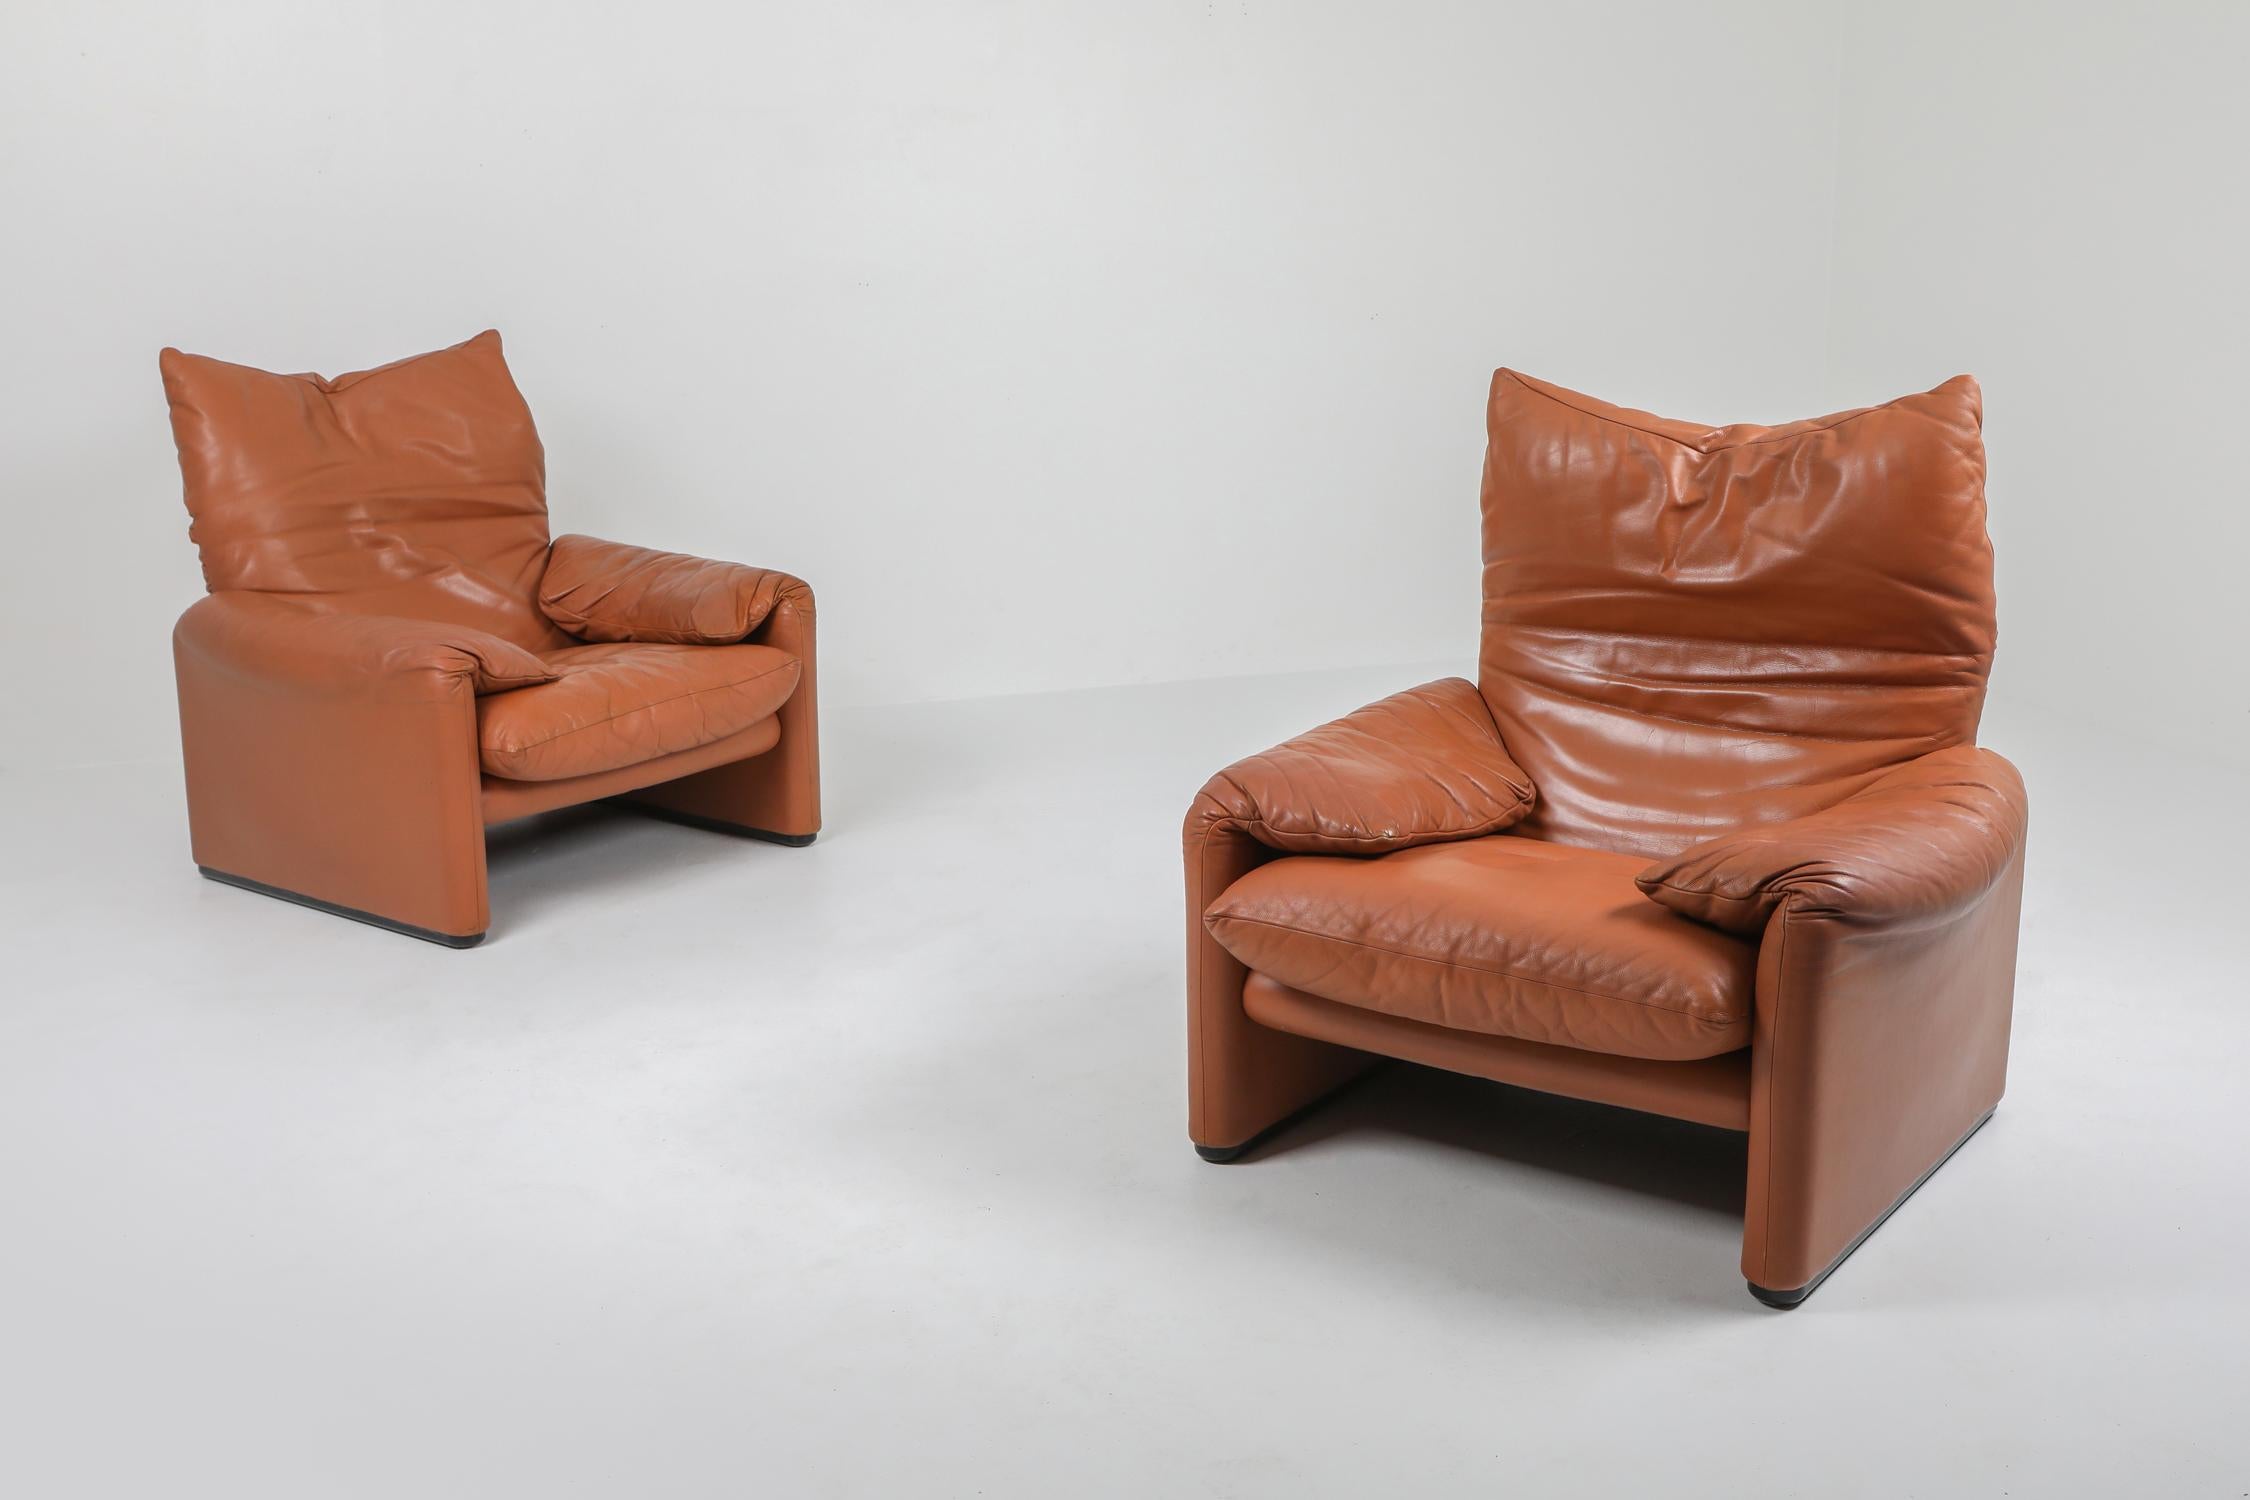 Post-Modern Maralunga Cognac Leather Club Chairs by Vico Magistretti for Cassina, 1974